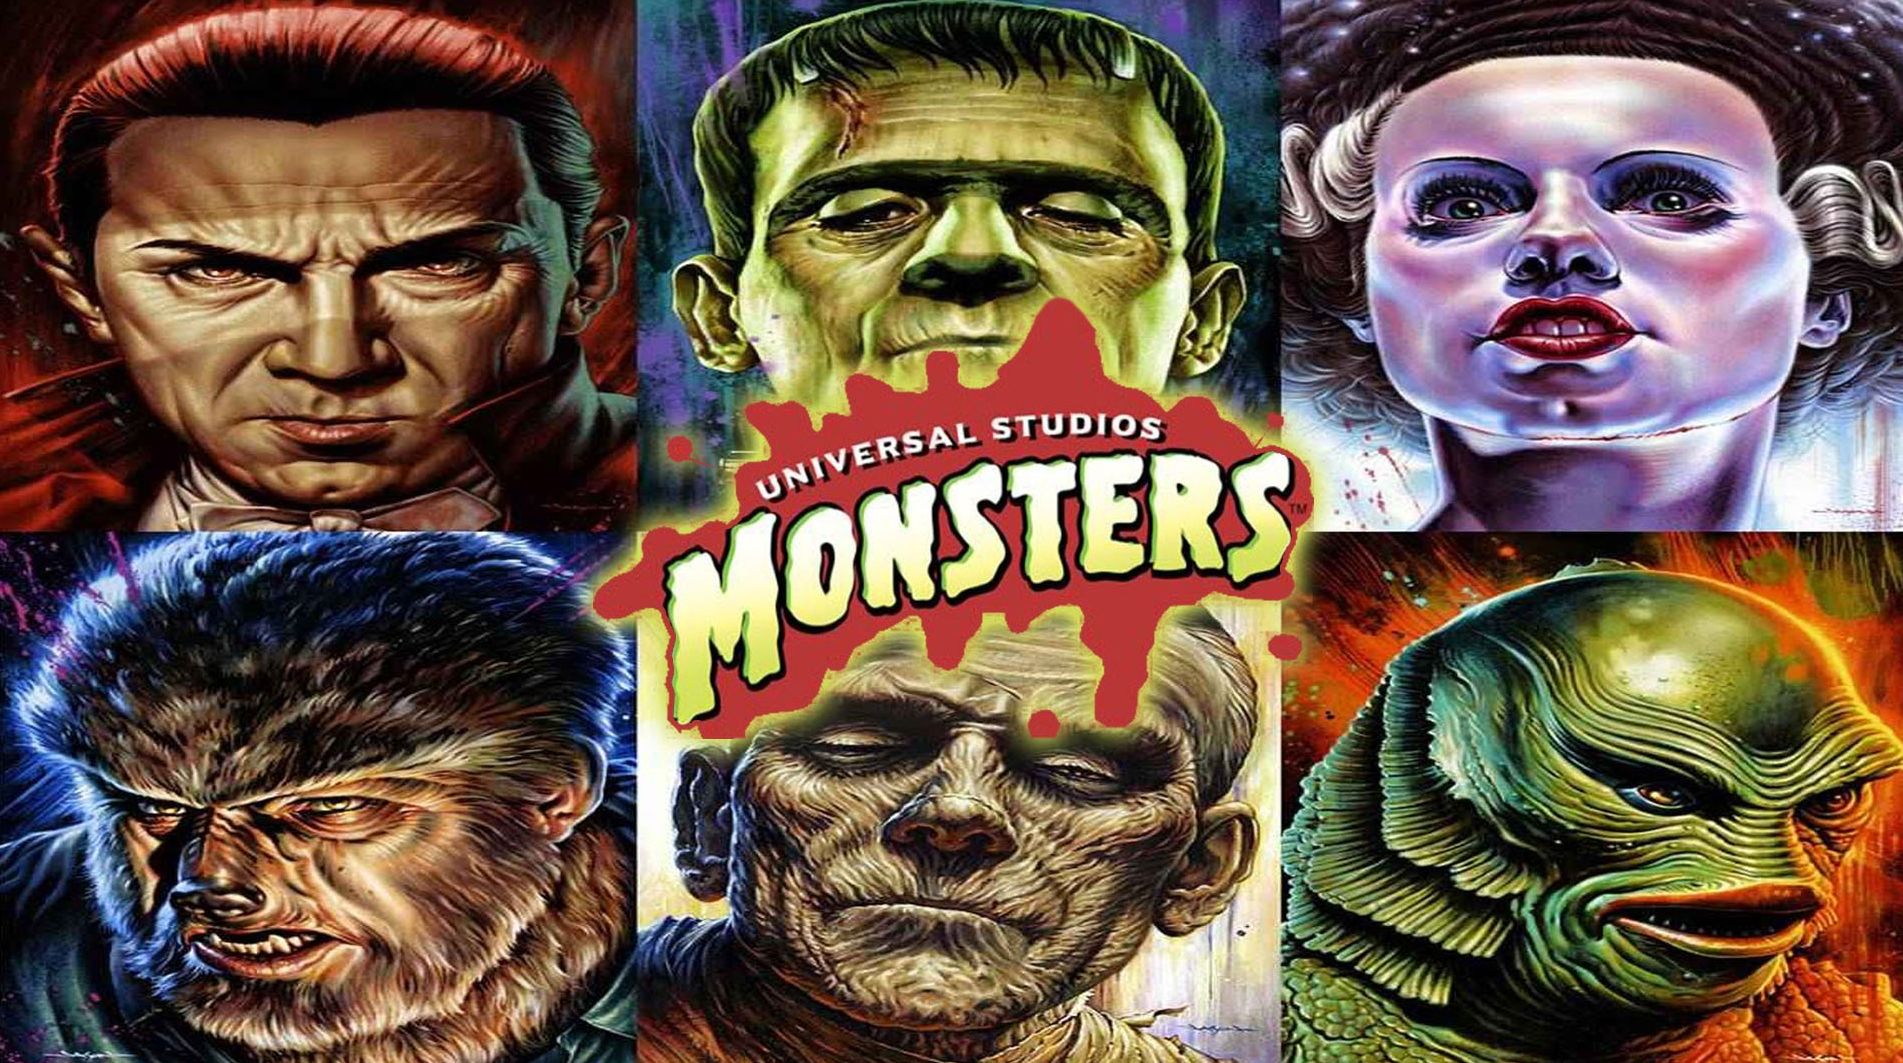 Monsters universe adds new title